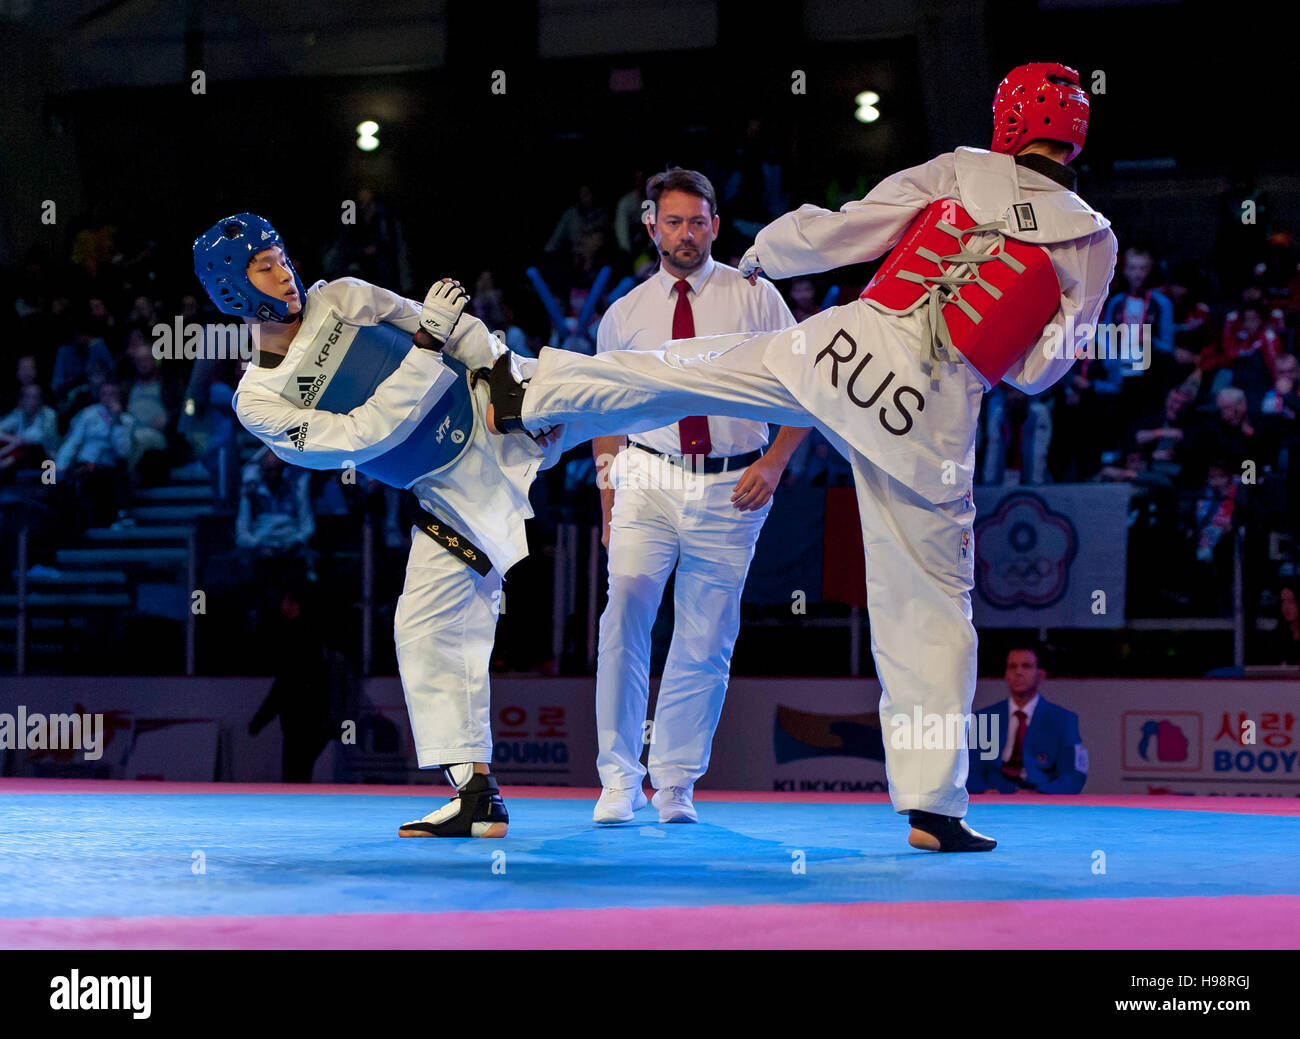 Burnaby, Canada. 19 November, 2016. WTF World Taekwondo Junior Championships Seung-Min Lee (KOR) and Sergey Karnuta (RUS) red compete in the final of male 73kg won by Lee. Alamy Live News/Peter Llewellyn Stock Photo